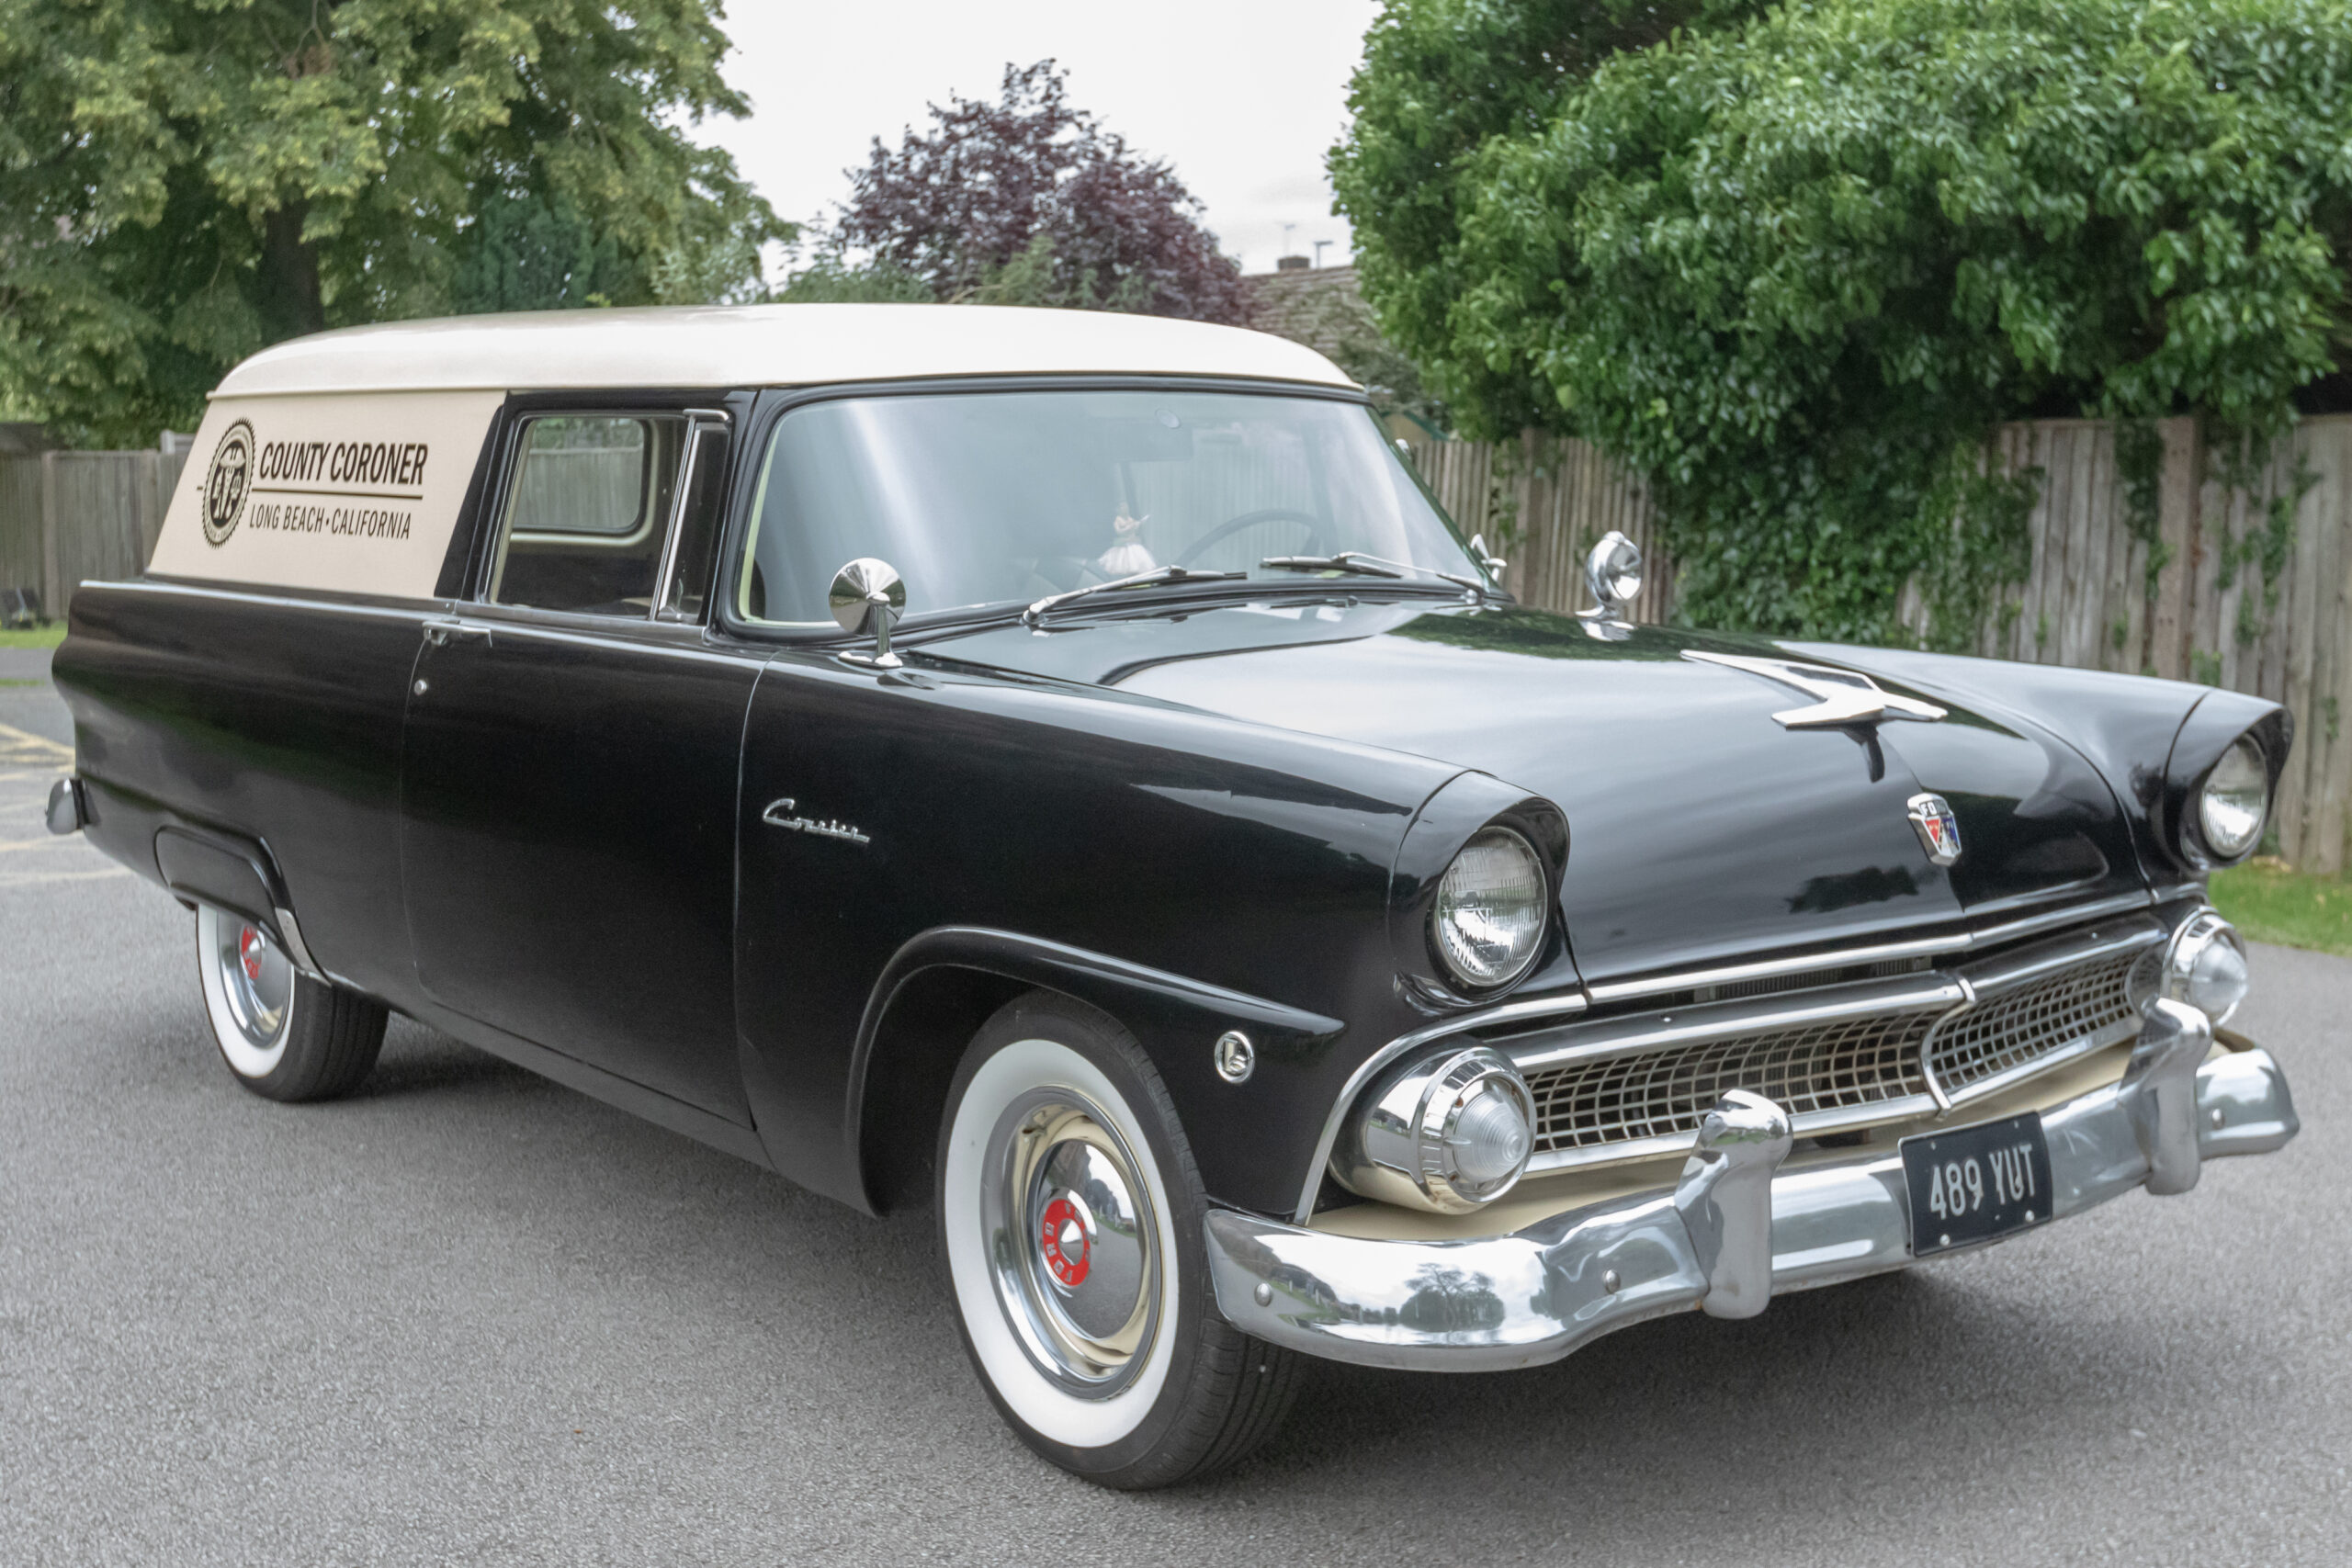 1955 Ford Courier Sedan Delivery Evoke Classics Classic Cars Auction online